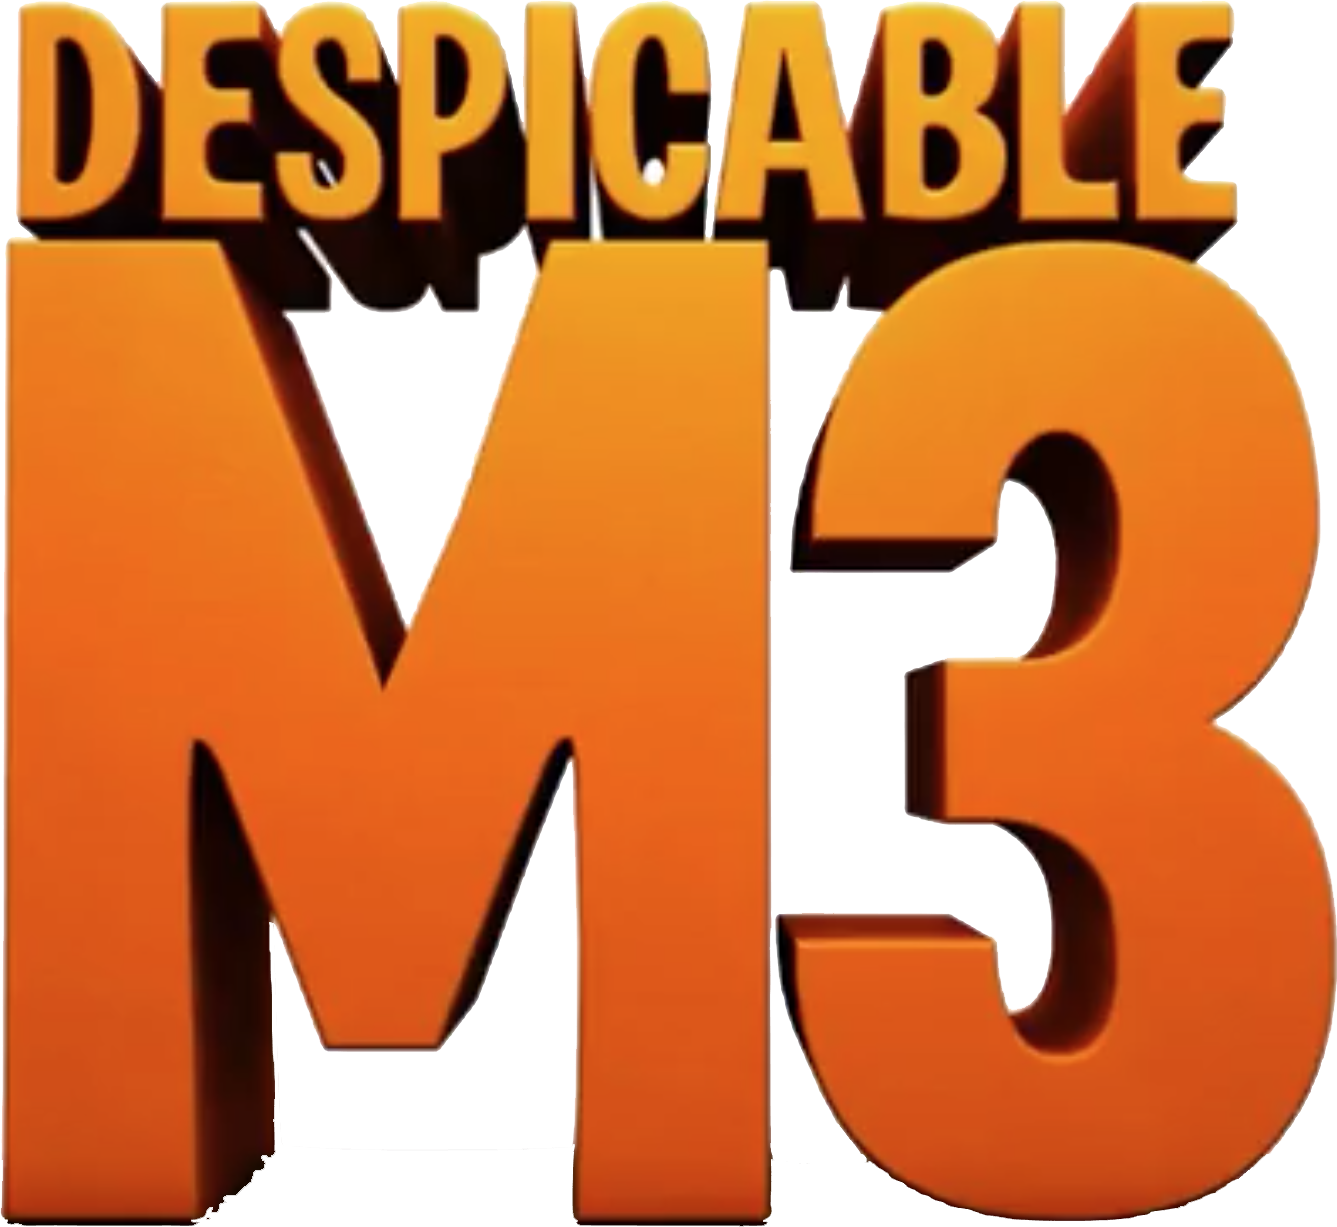 Despicable Me 3 | Despicable Me Wiki | FANDOM powered by Wikia